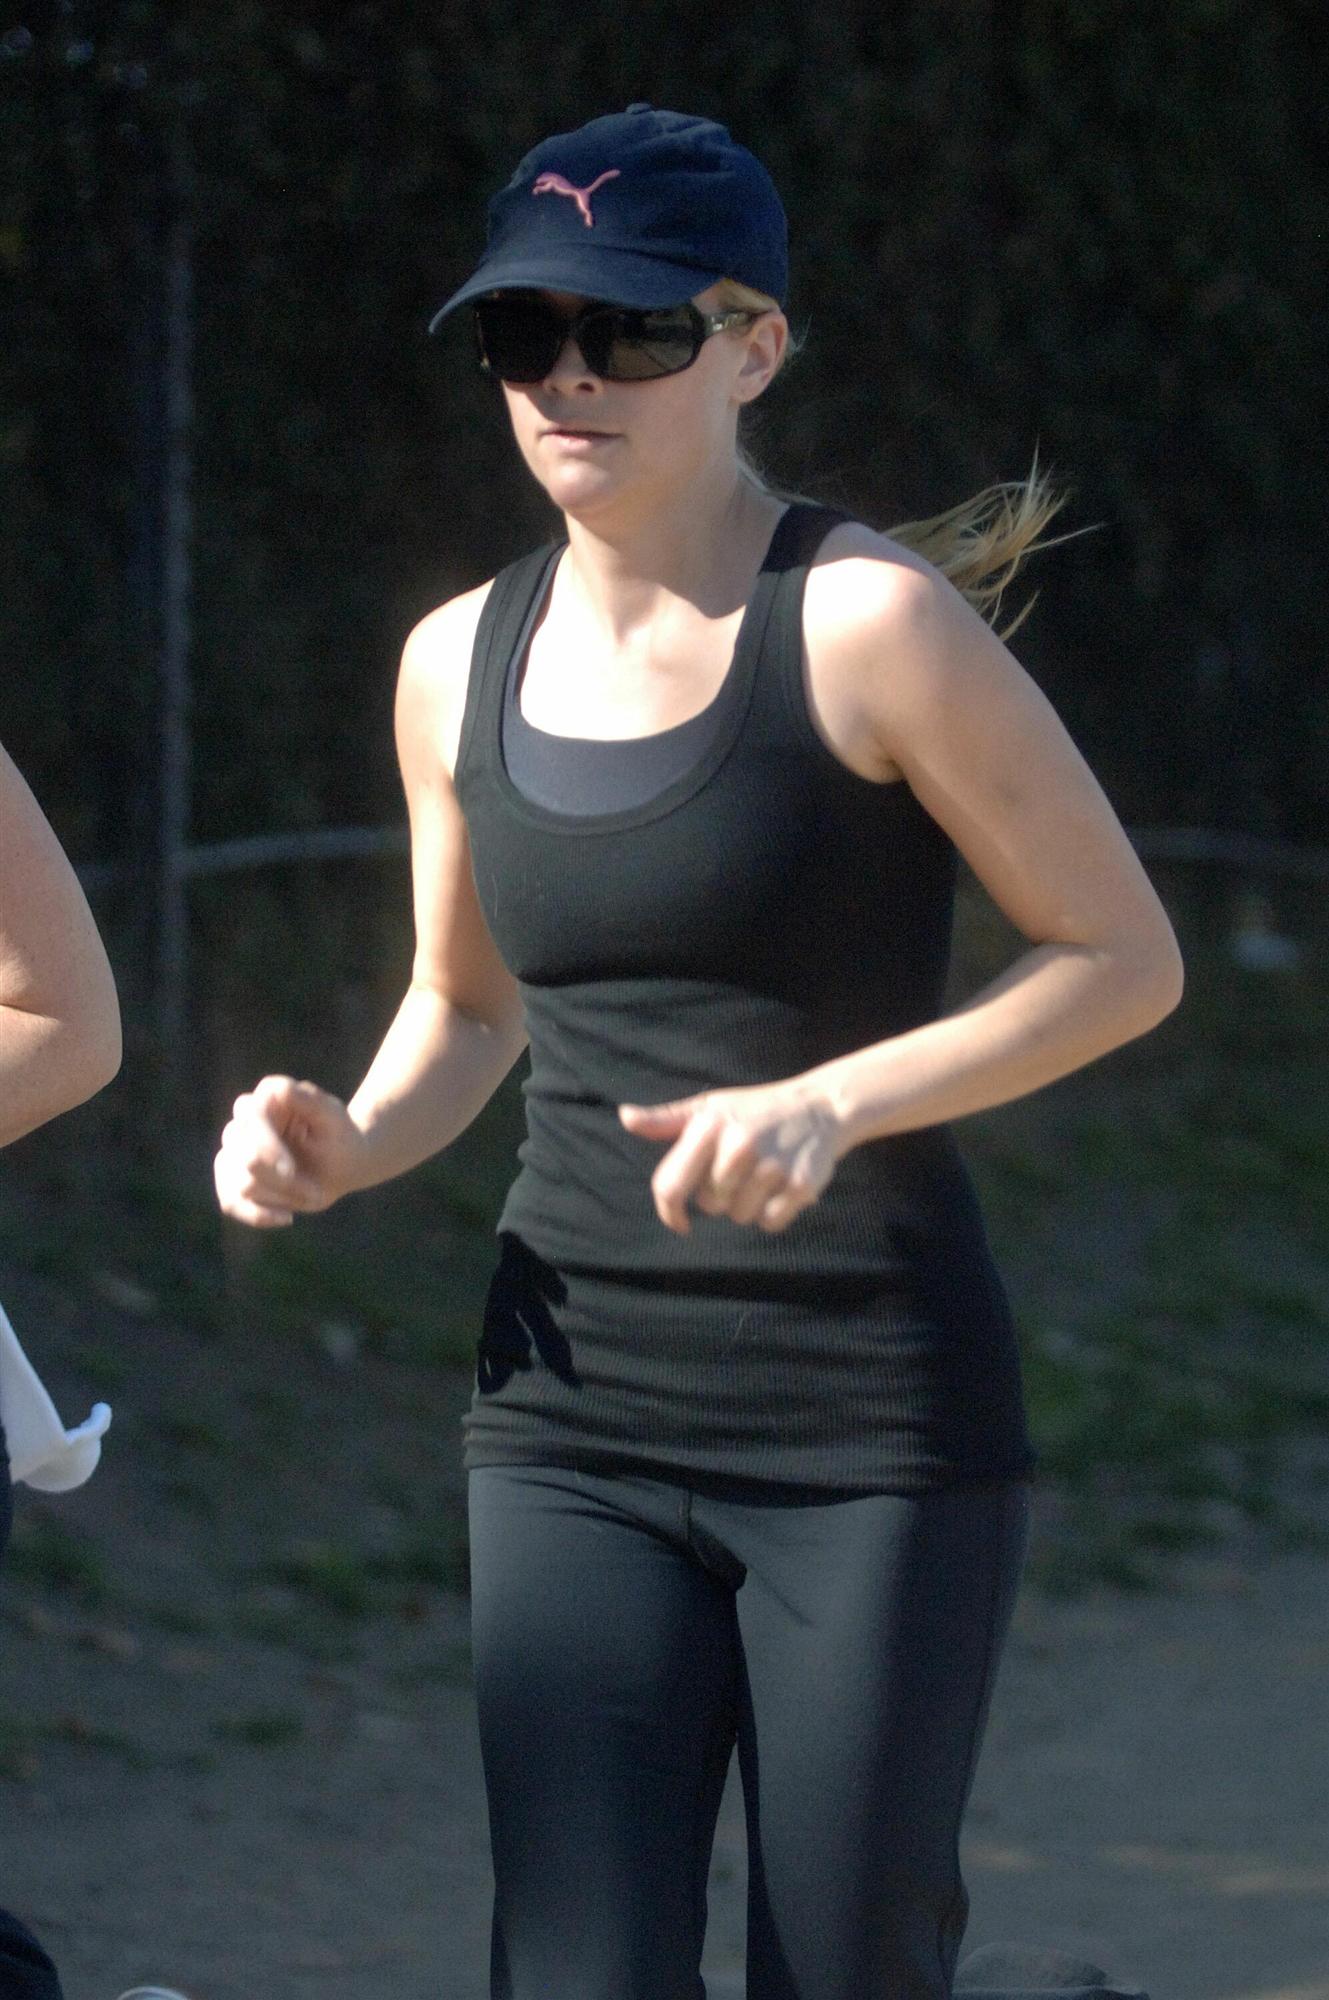 Reese Witherspoon Jogging1.jpg